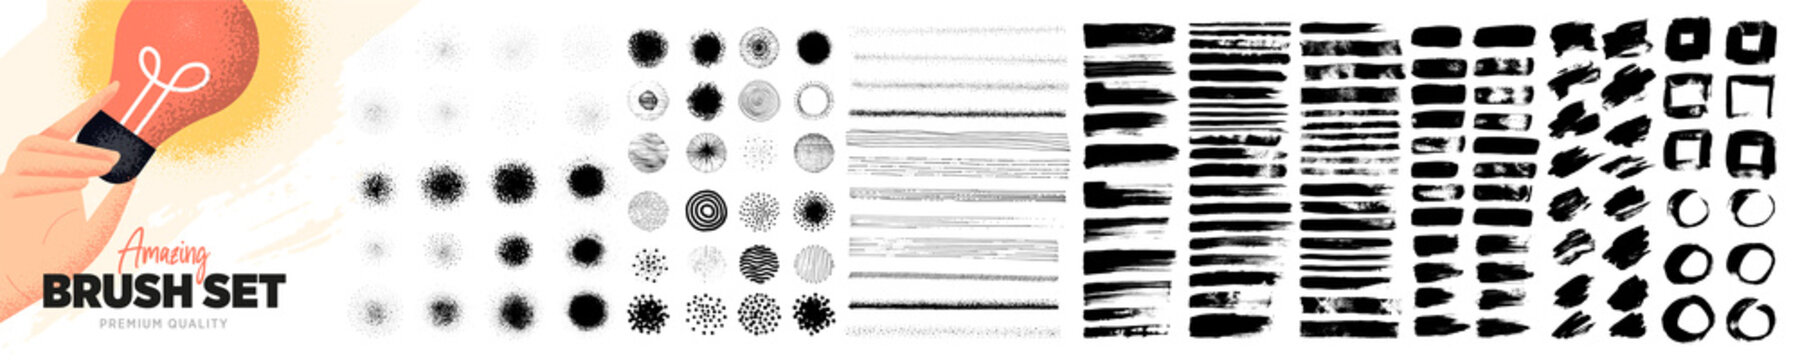 Set of hand drawn brush elements, textures and patterns, and graphic elements.  Vector illustration concepts for graphic and web design, packaging design, marketing material.